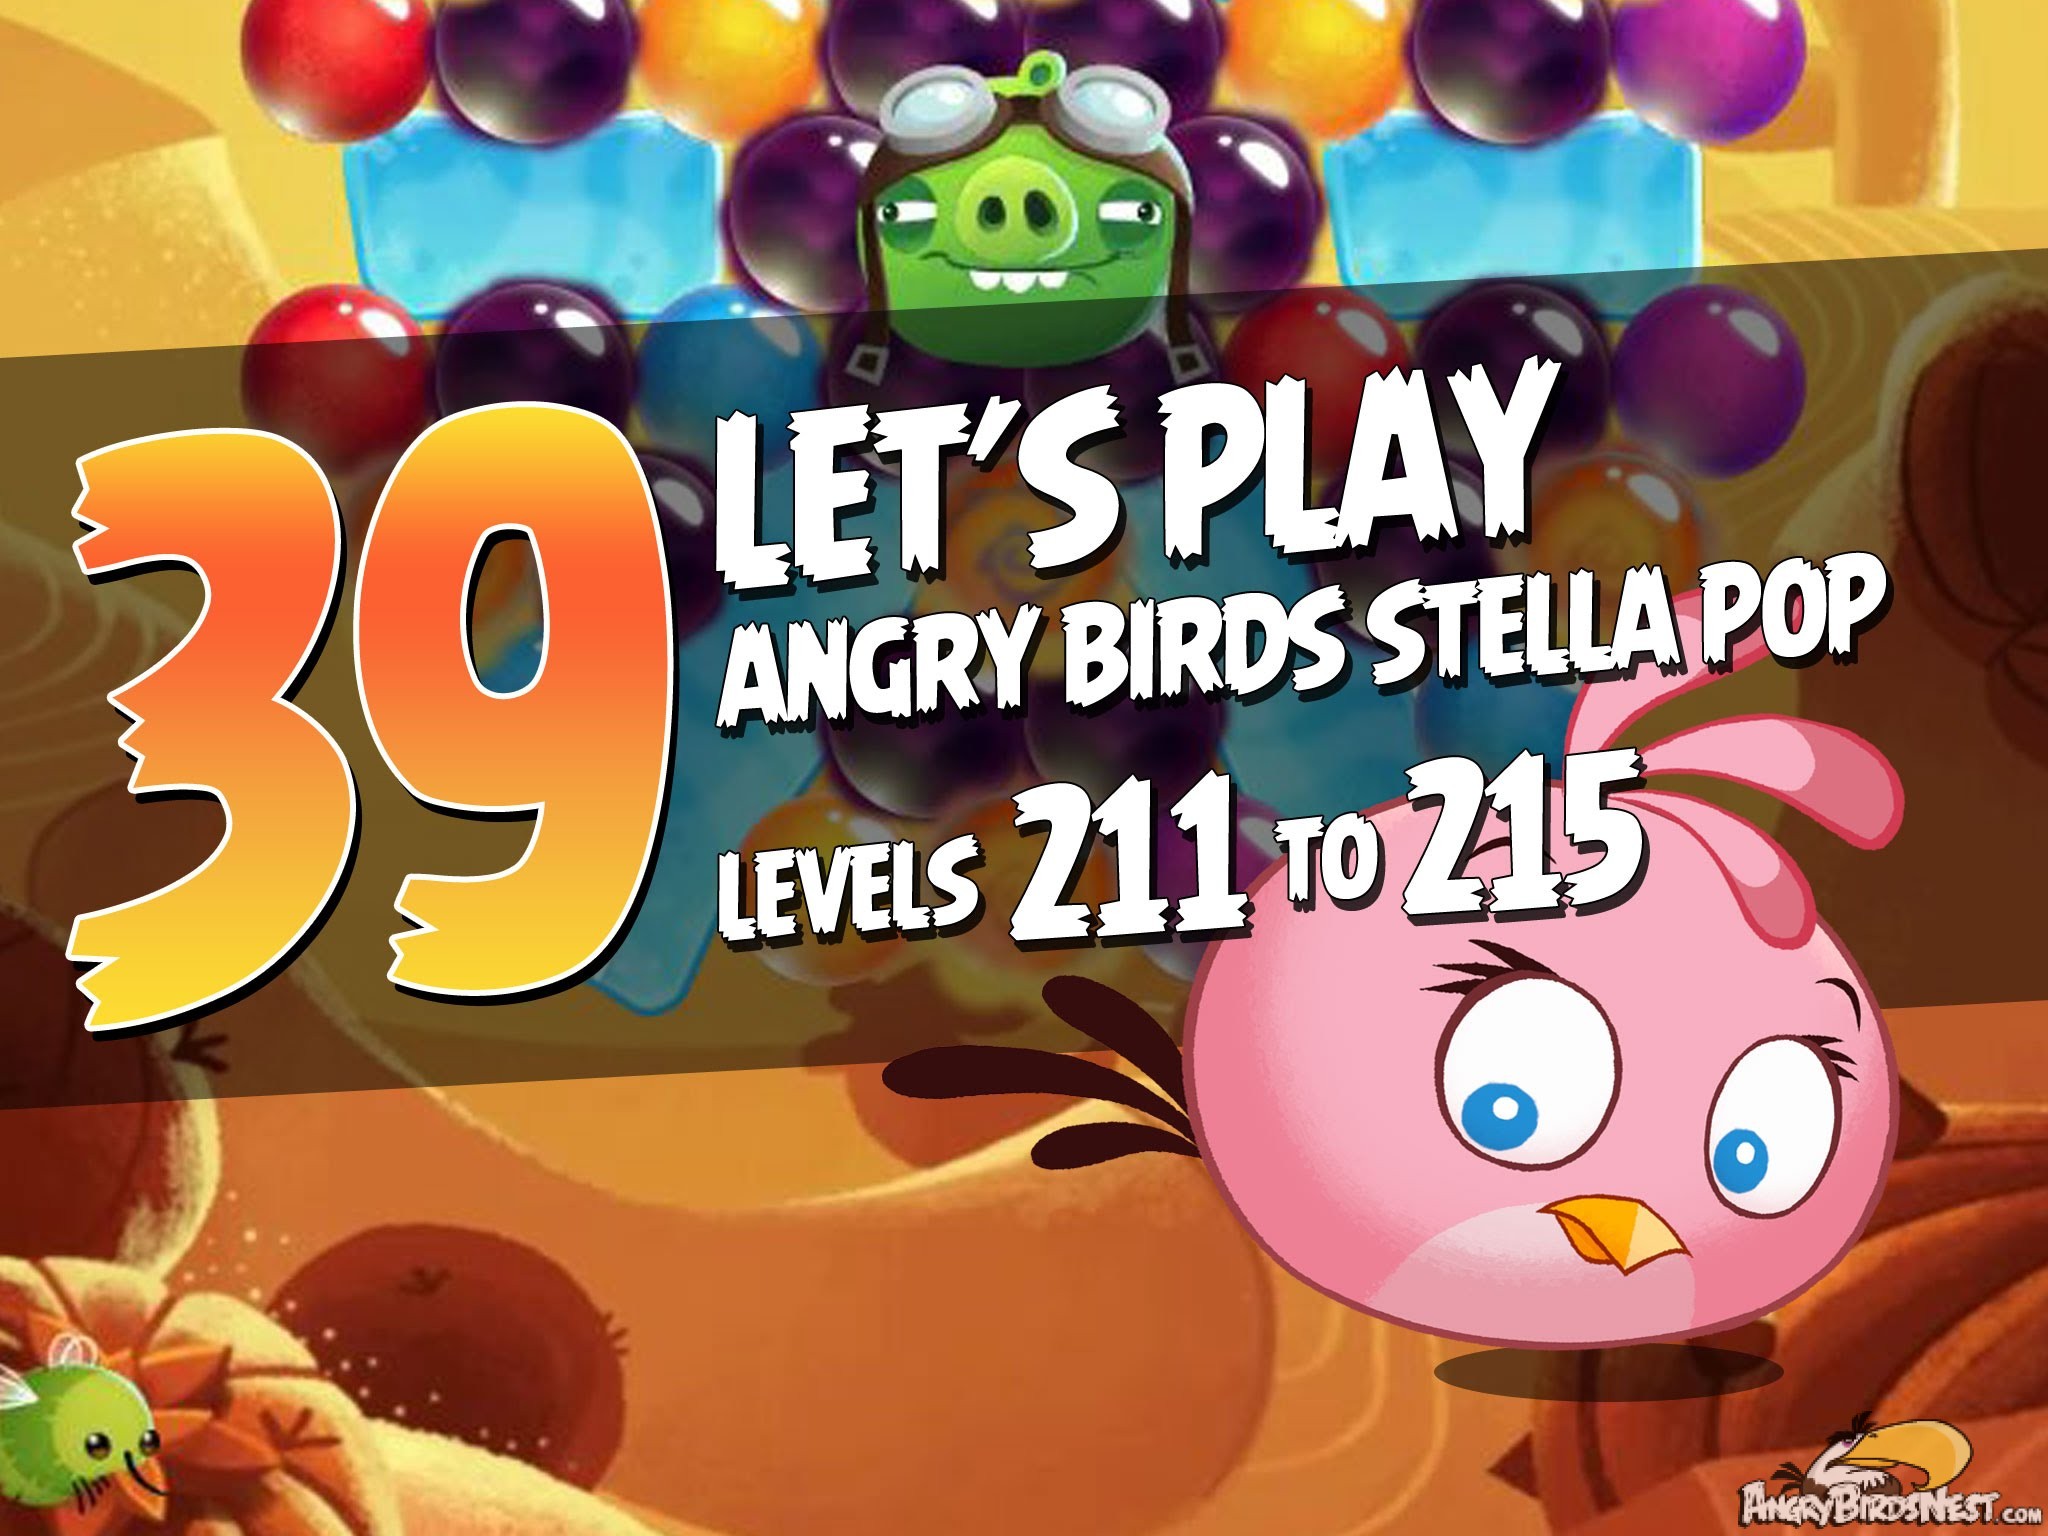 Angry Birds Stella Pop Let's Play Levels 211 to 215